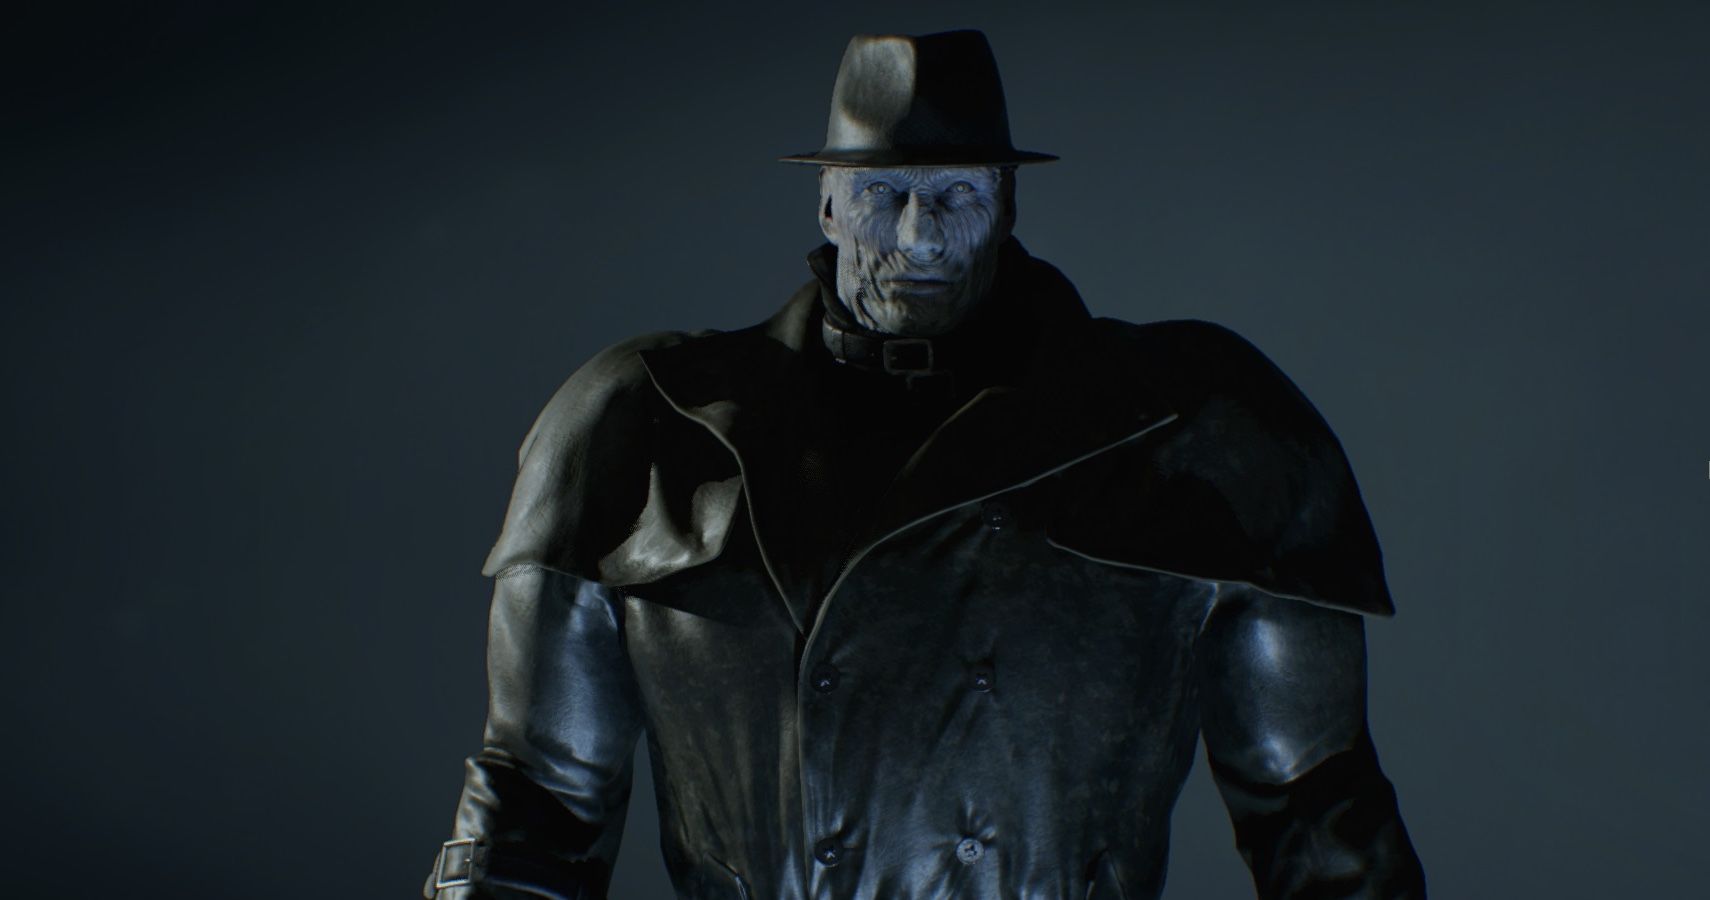 x gon give it to ya resident evil 2 mod